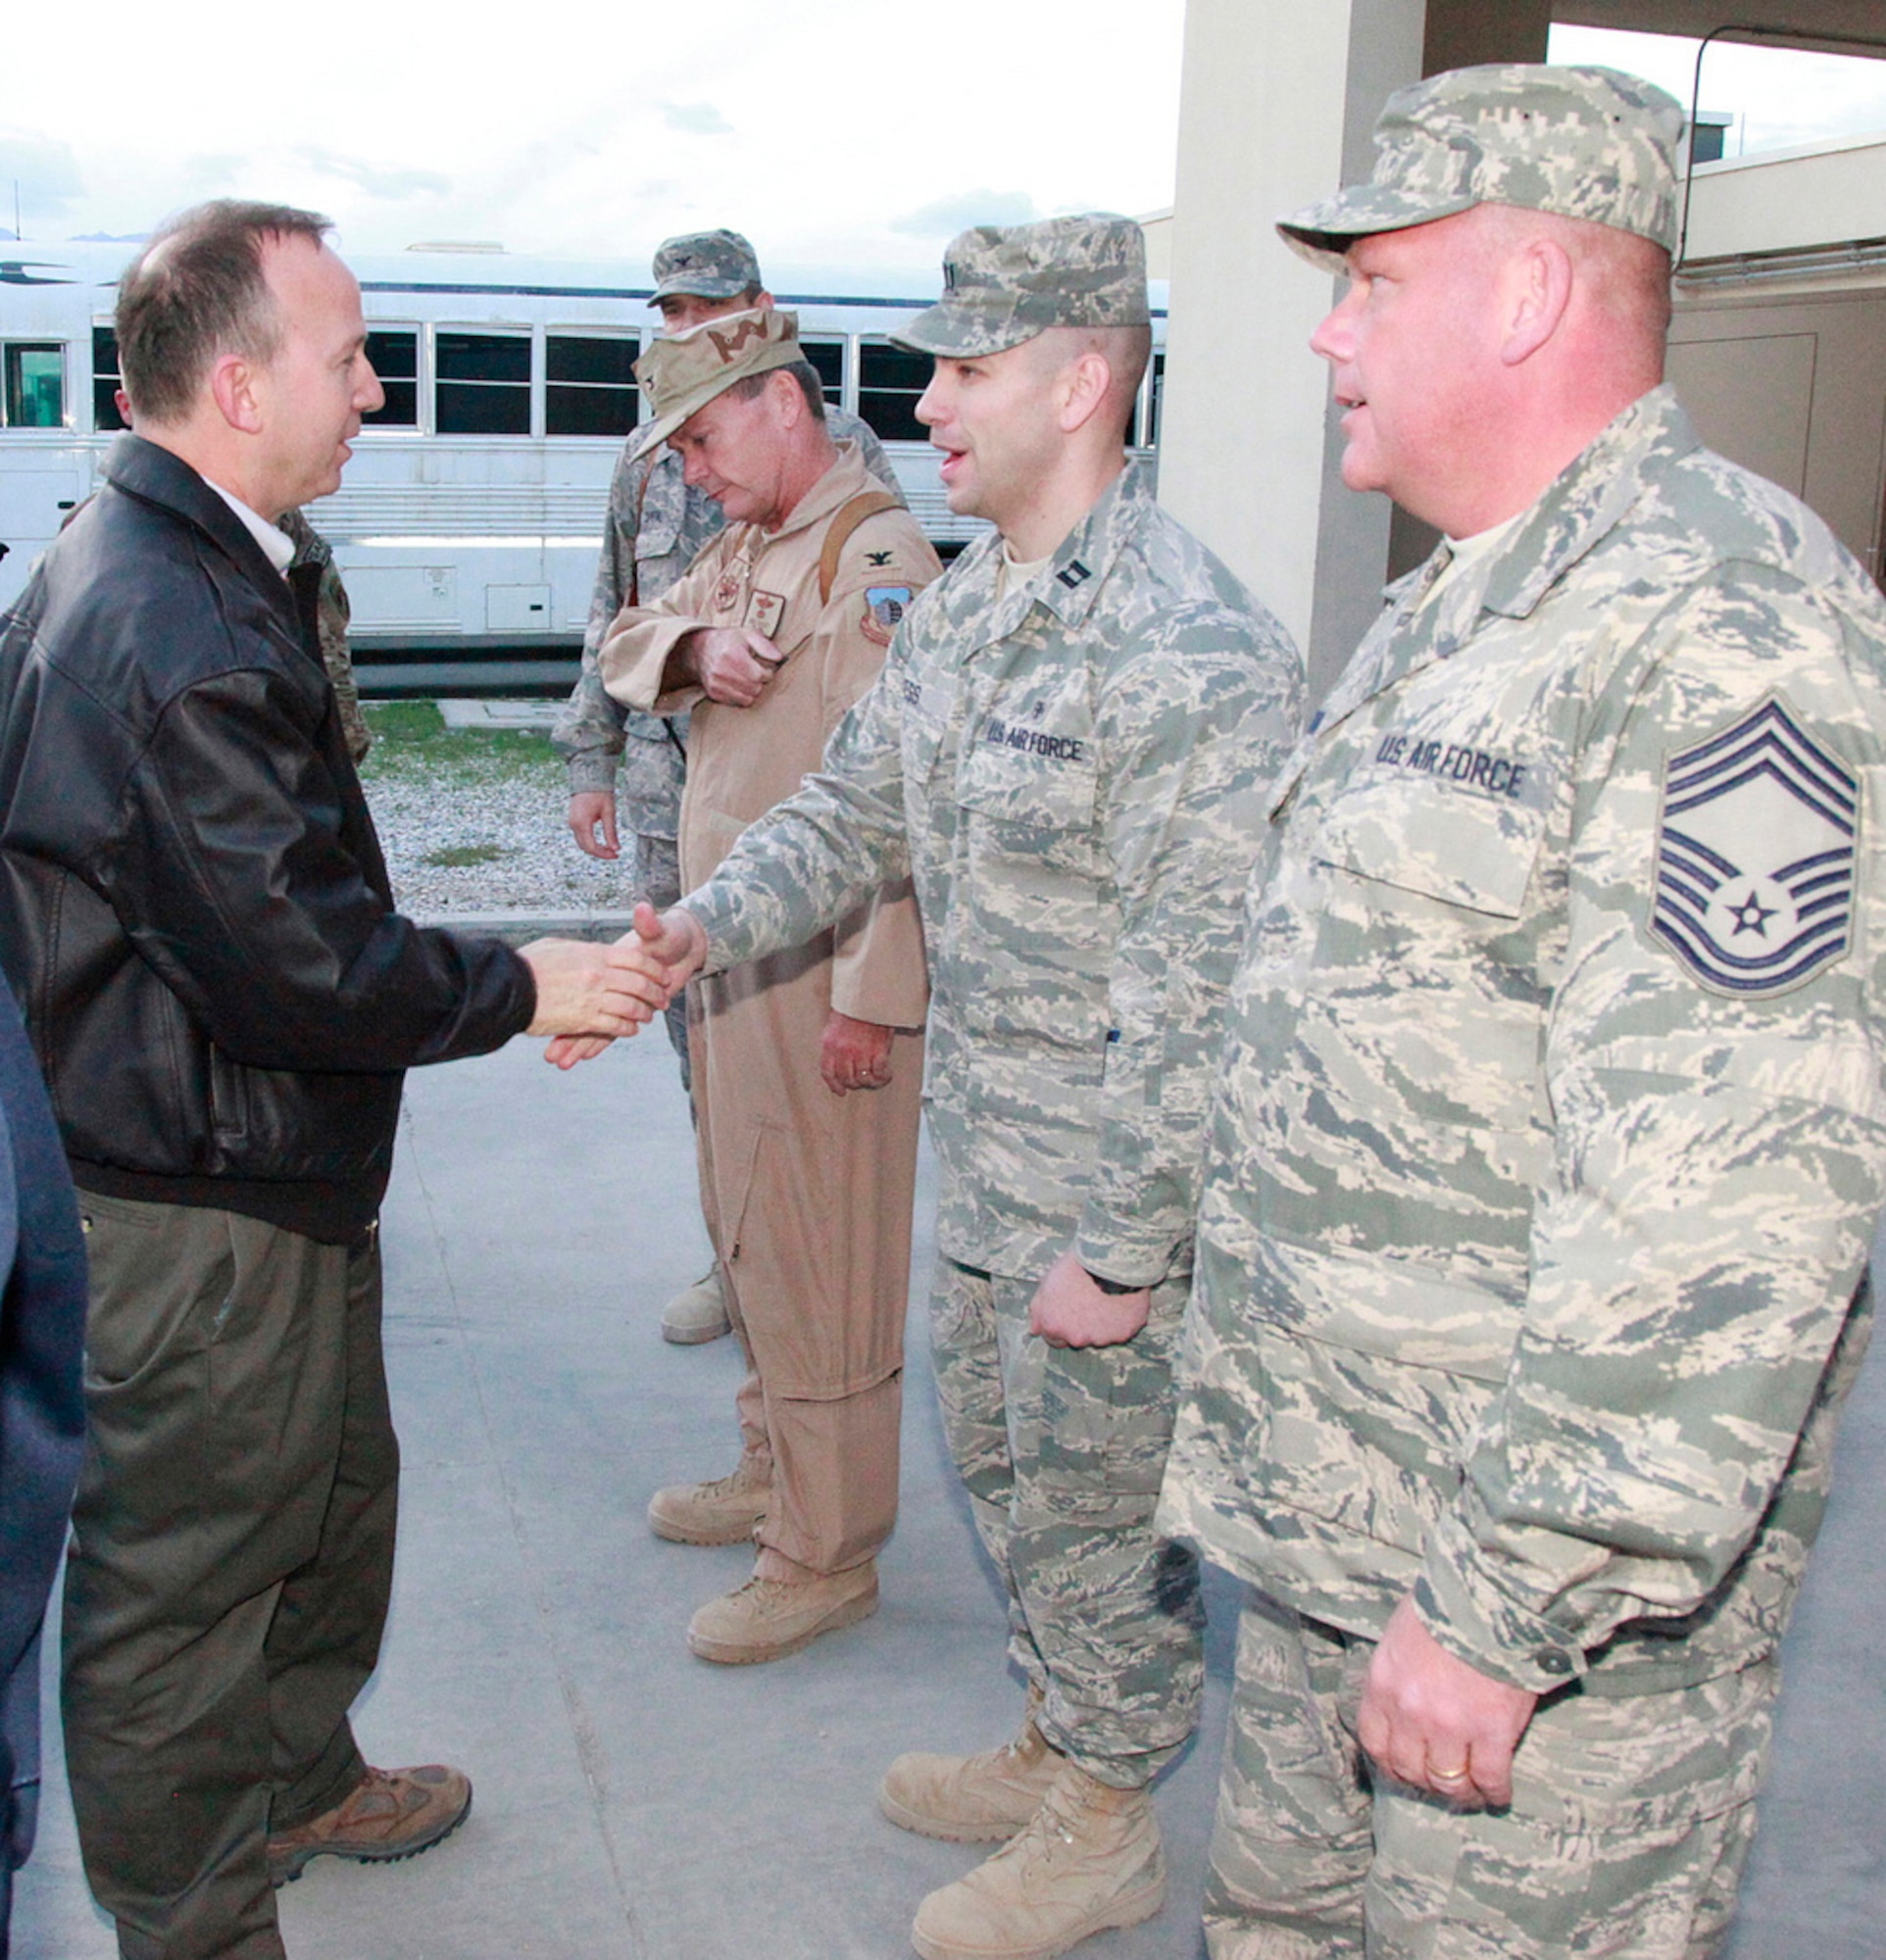 Delaware Governor Jack Markell, left, meets Delaware Airmen at Bagram Air Base, Afghanistan on Nov. 16, 2011. To the left of the governor is Col. Mike Feeley (tan flight suit), deputy operations group commander, 455th Air Expeditionary Wing, Bagram Air Base, Afghanistan, and commander, 166th Operations Group, 166th Airlift Wing, Delaware Air National Guard in New Castle, Delaware. Governor Markell and Connecticut Governor Dannel Malloy spent a day in one nation in Southwest Asia and two days in Afghanistan meeting troops from their respective states. (Courtesy photo/Delaware office of the governor)